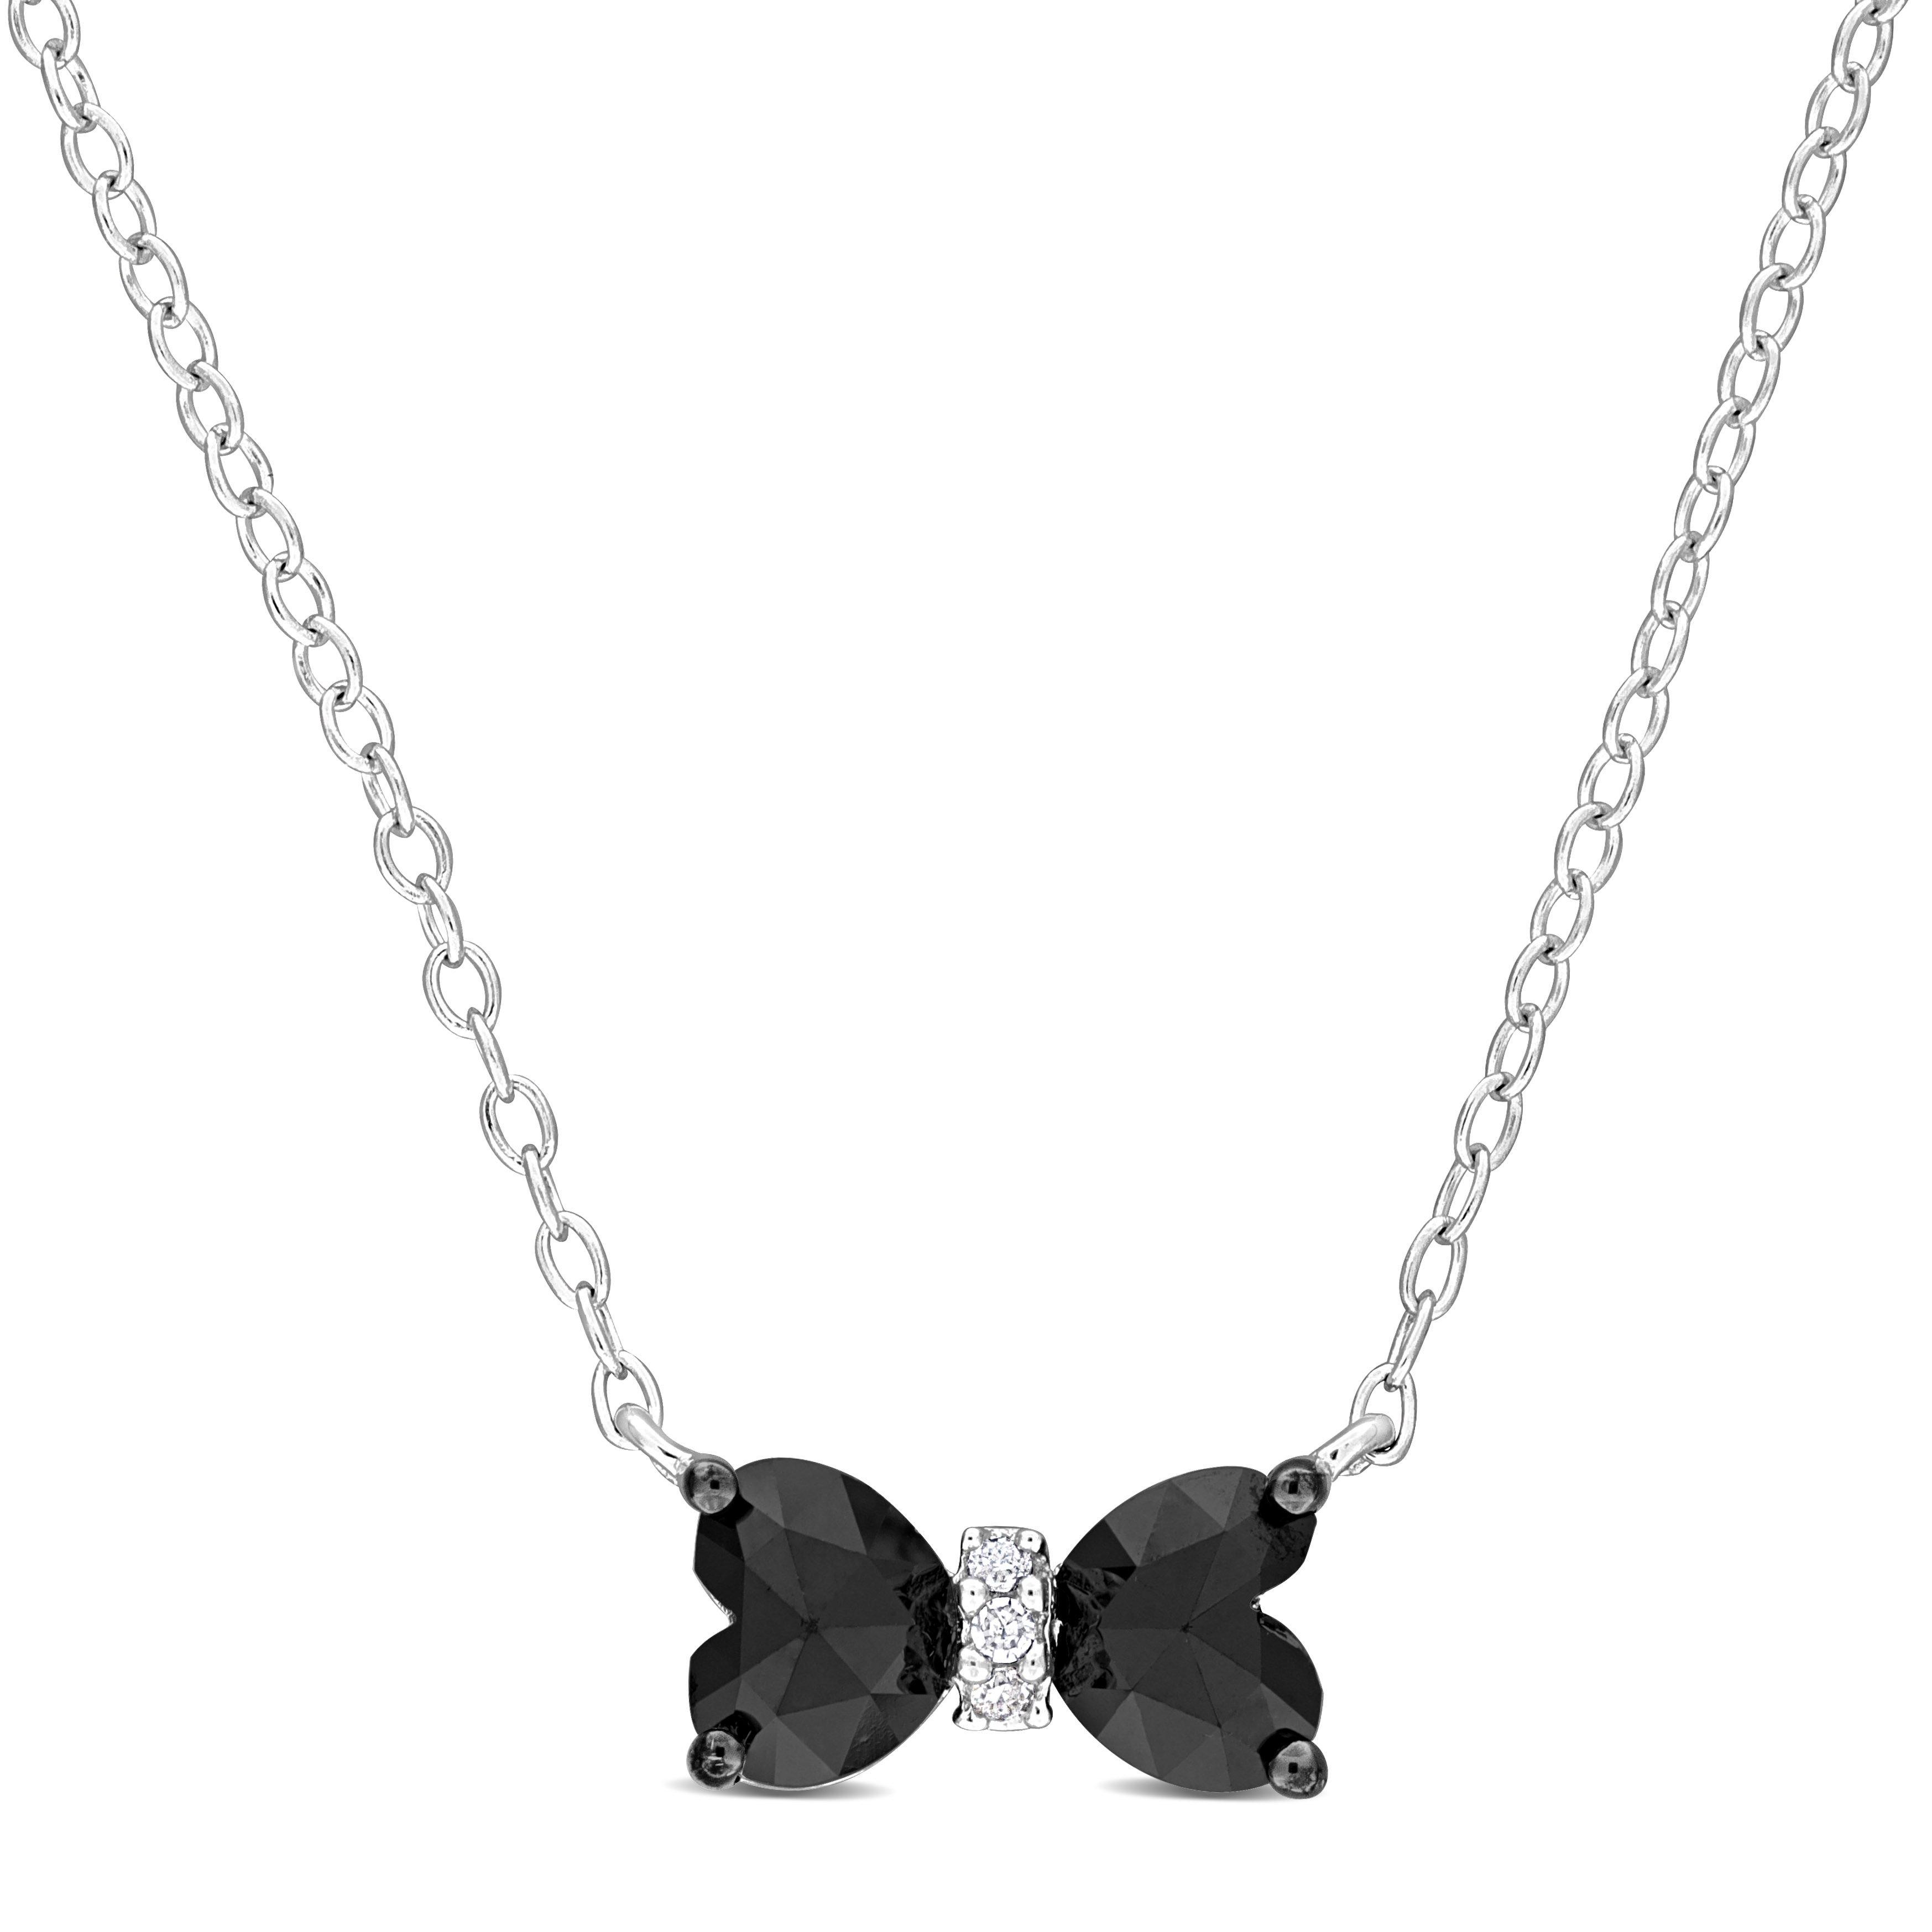 3/4 CT TDW Black and White Diamond Bow Necklace in Sterling Silver - 17 in.